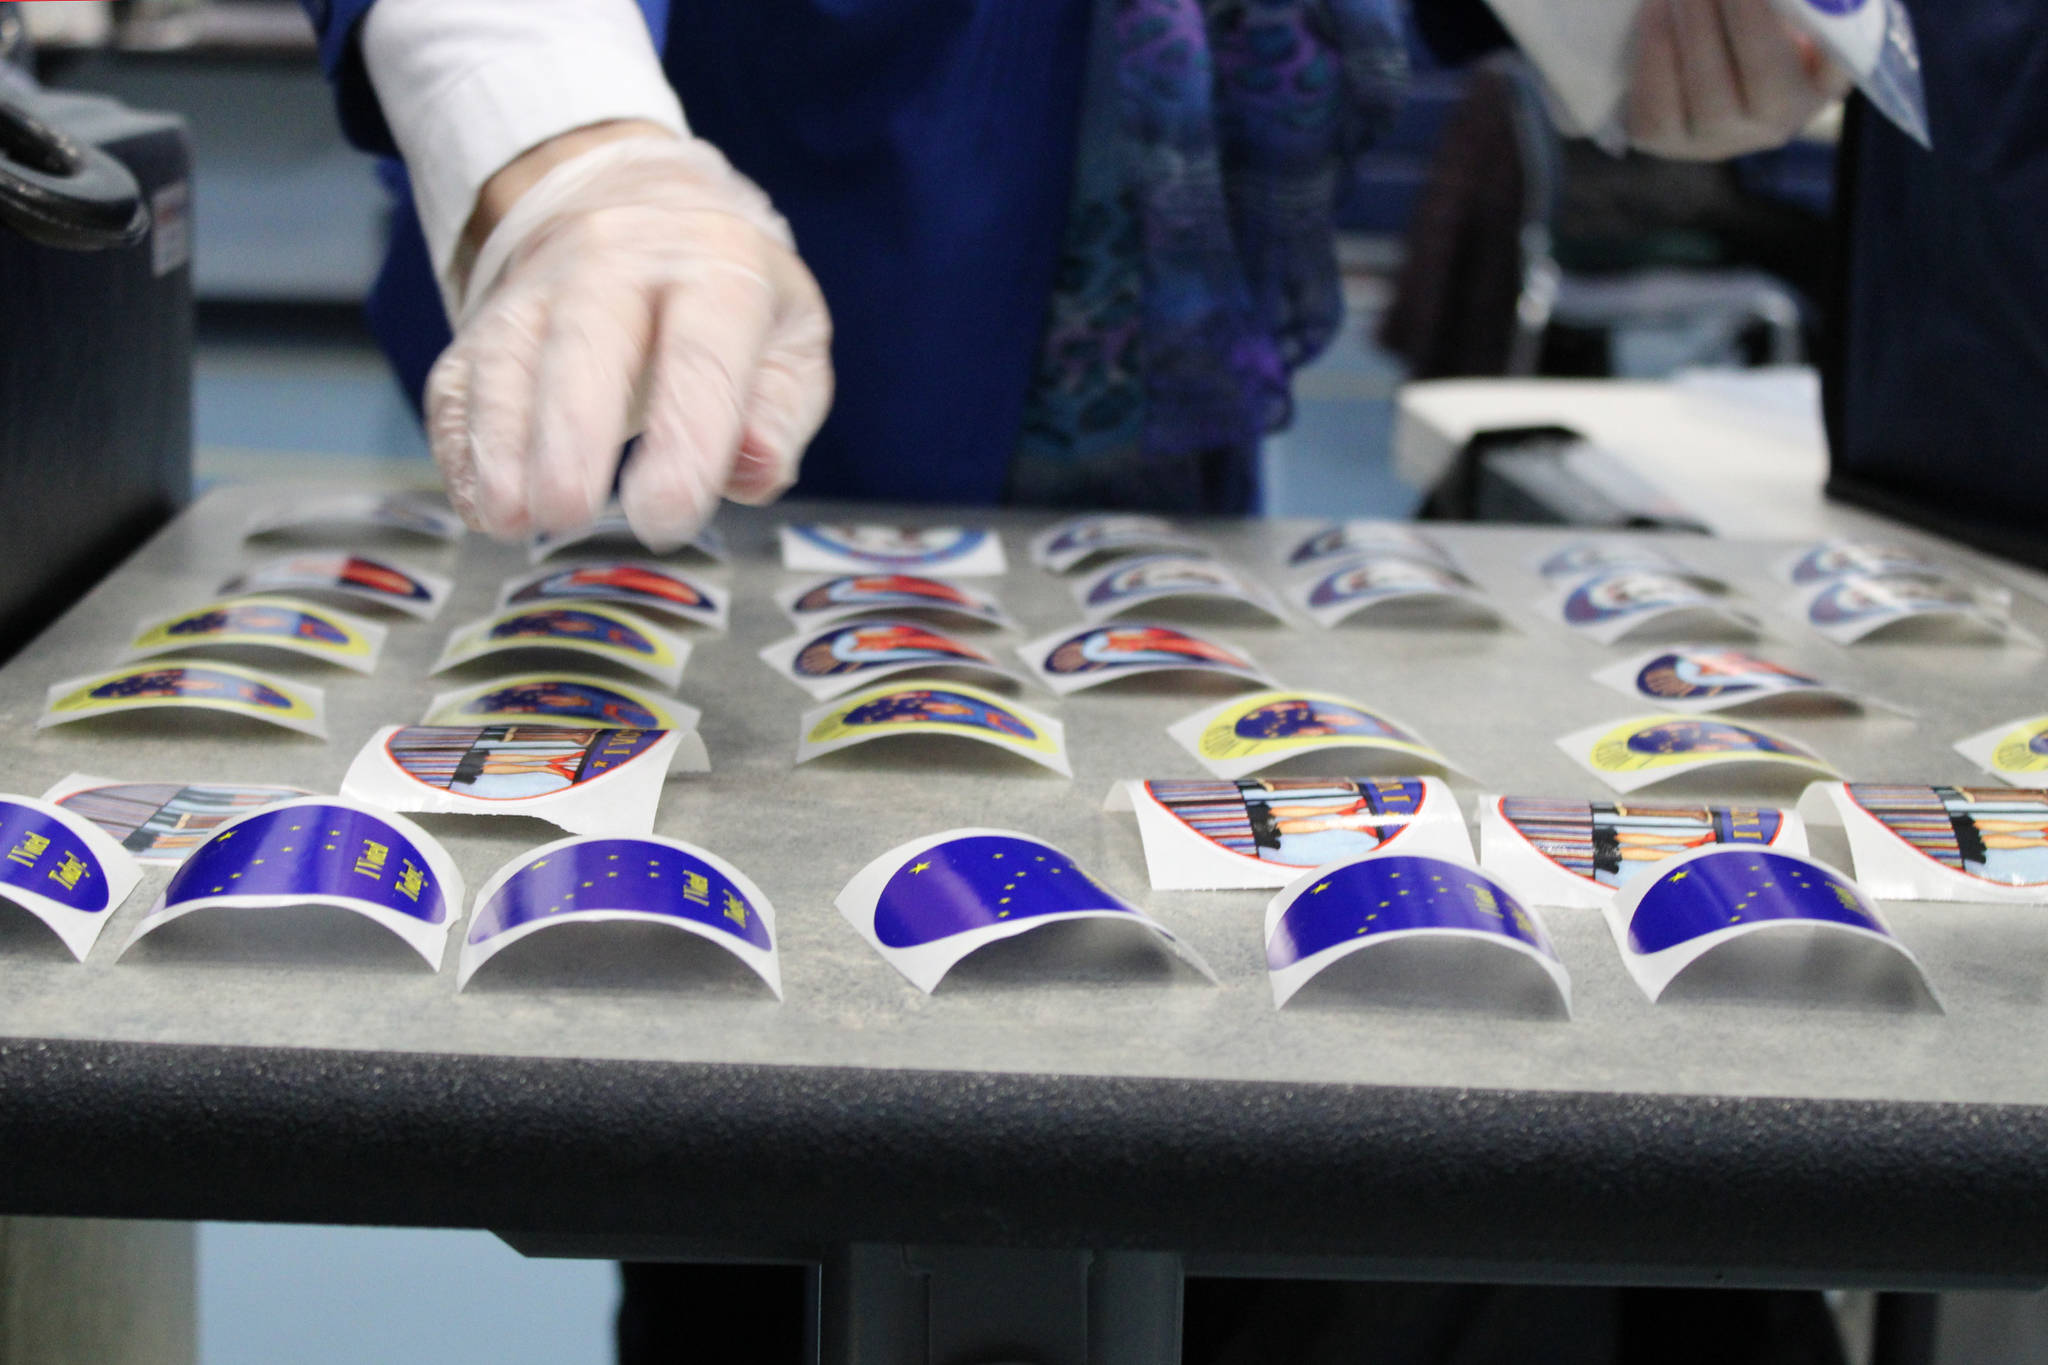 An election official lays out more “I voted” stickers on Tuesday, Nov. 3. Stickers for the 2020 general election featured designs by Alaskan artist Barbara Lavallee. (Ben Hohenstatt / Juneau Empire)